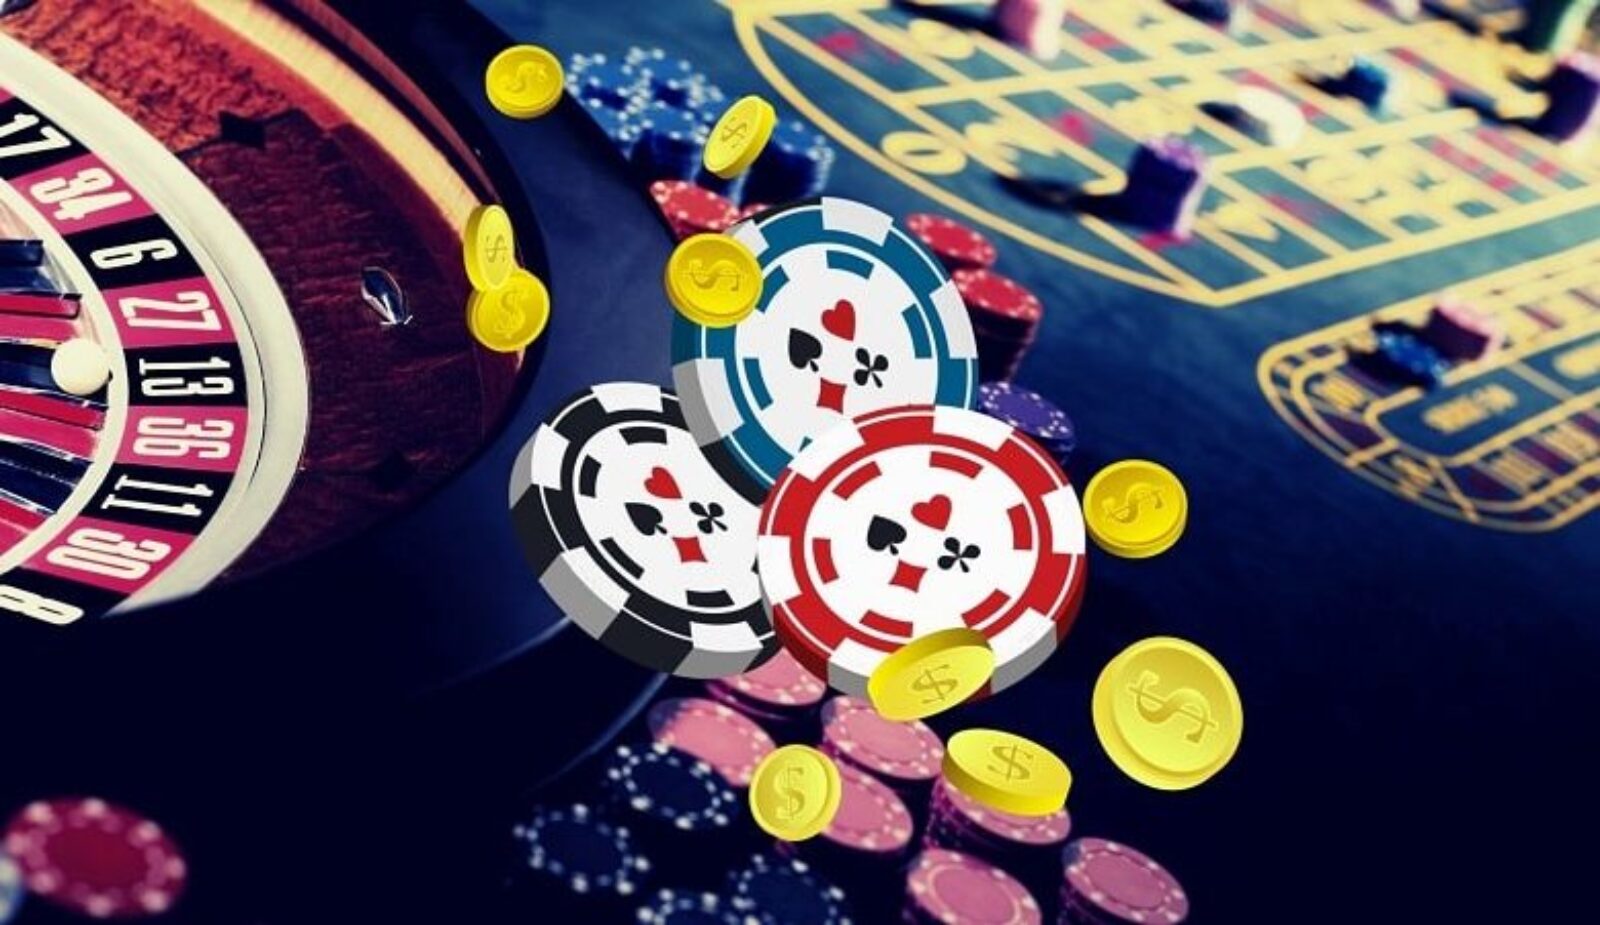 6 Thrilling Features of Online Casino Games That One Should Know